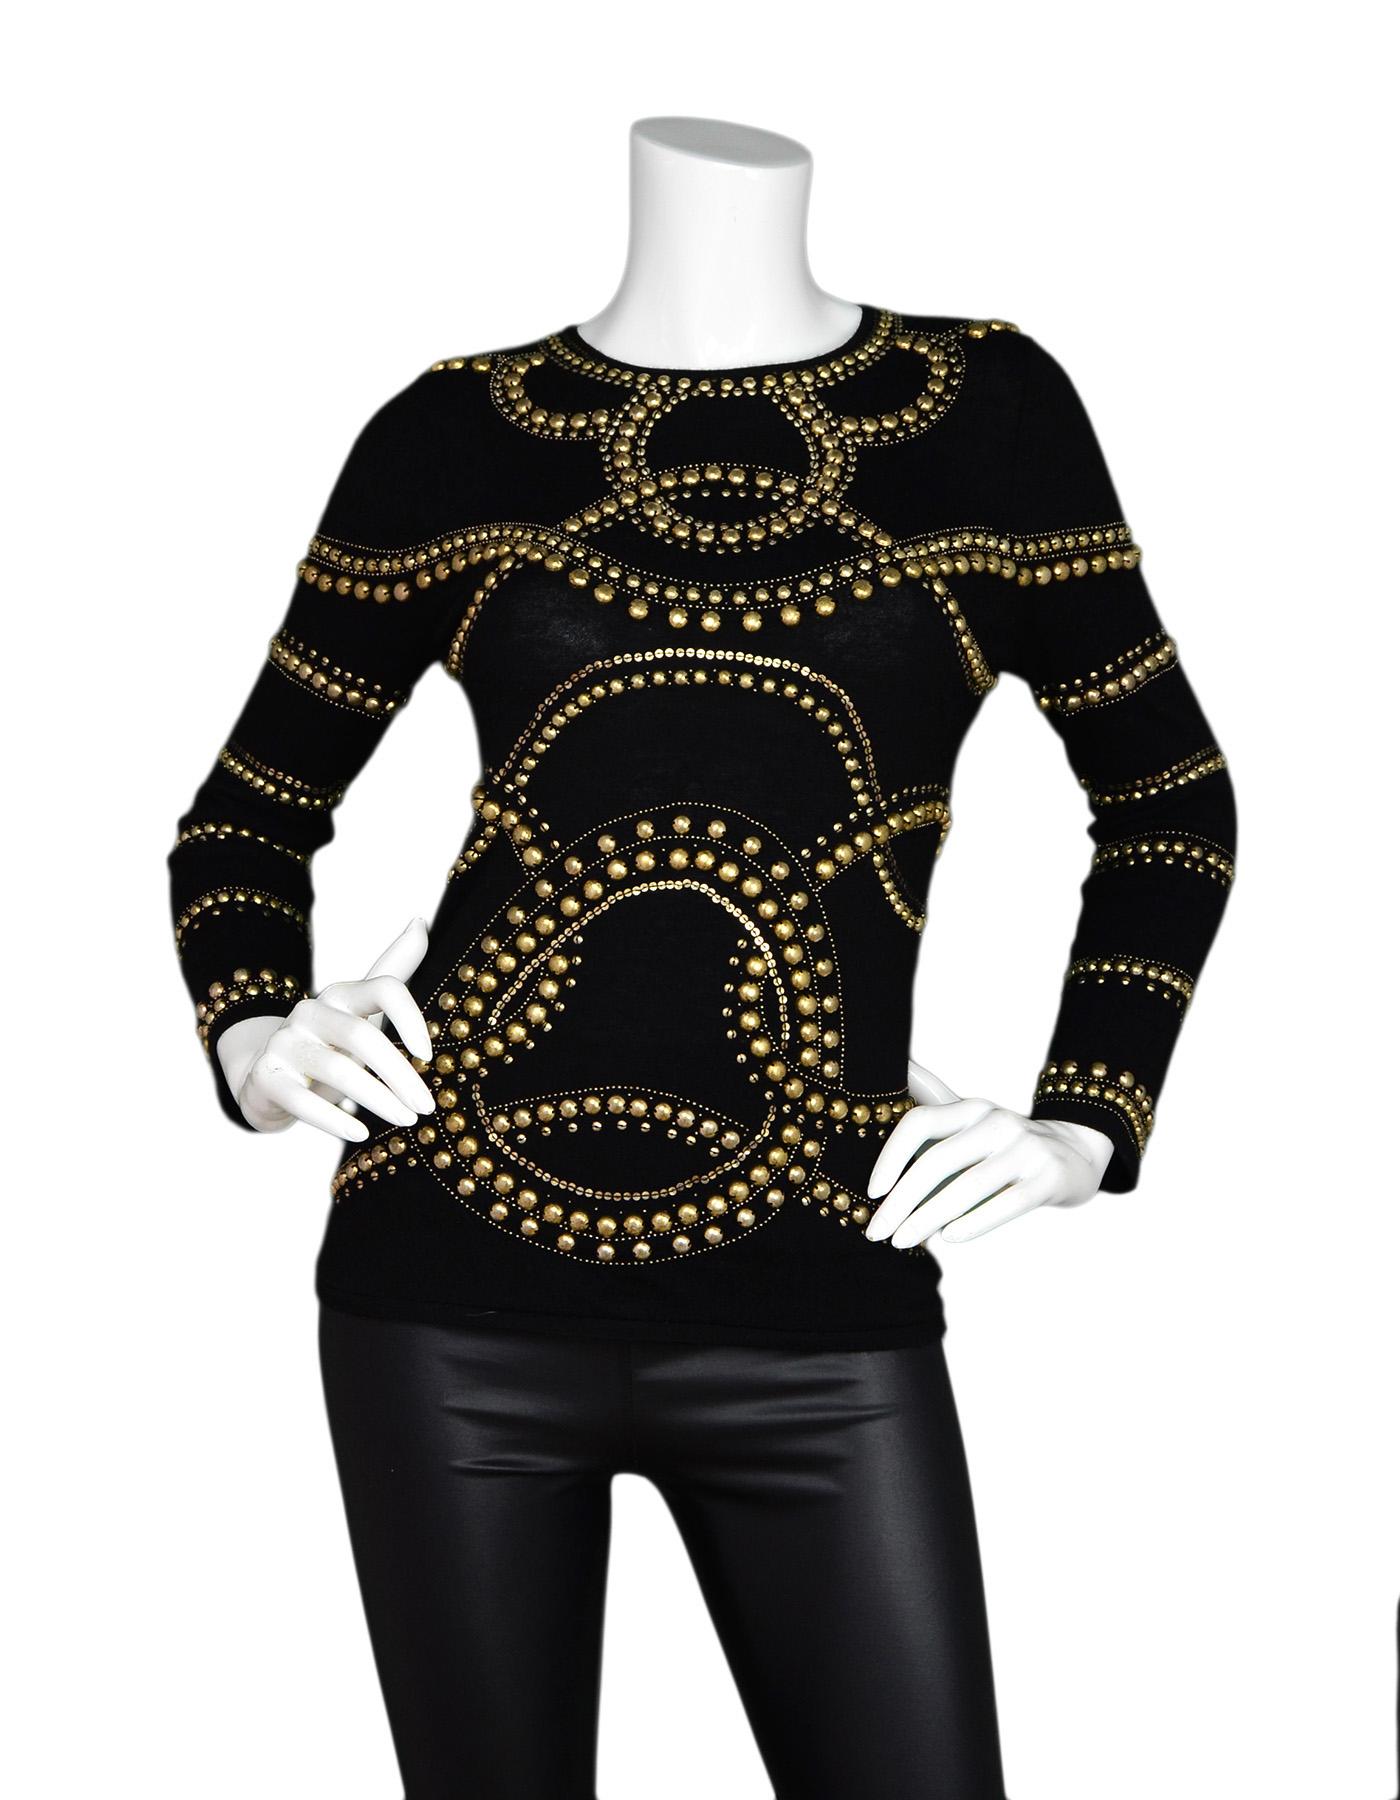 Naeem Kahn Black/Gold Embellished Cashmere Sweater Sz P (S)

Made In: China
Color: Black and gold
Materials: 100% superfine cashmere, metal
Opening/Closure: Hook-eye closure on back
Overall Condition: Very good pre-owned condition with exception of